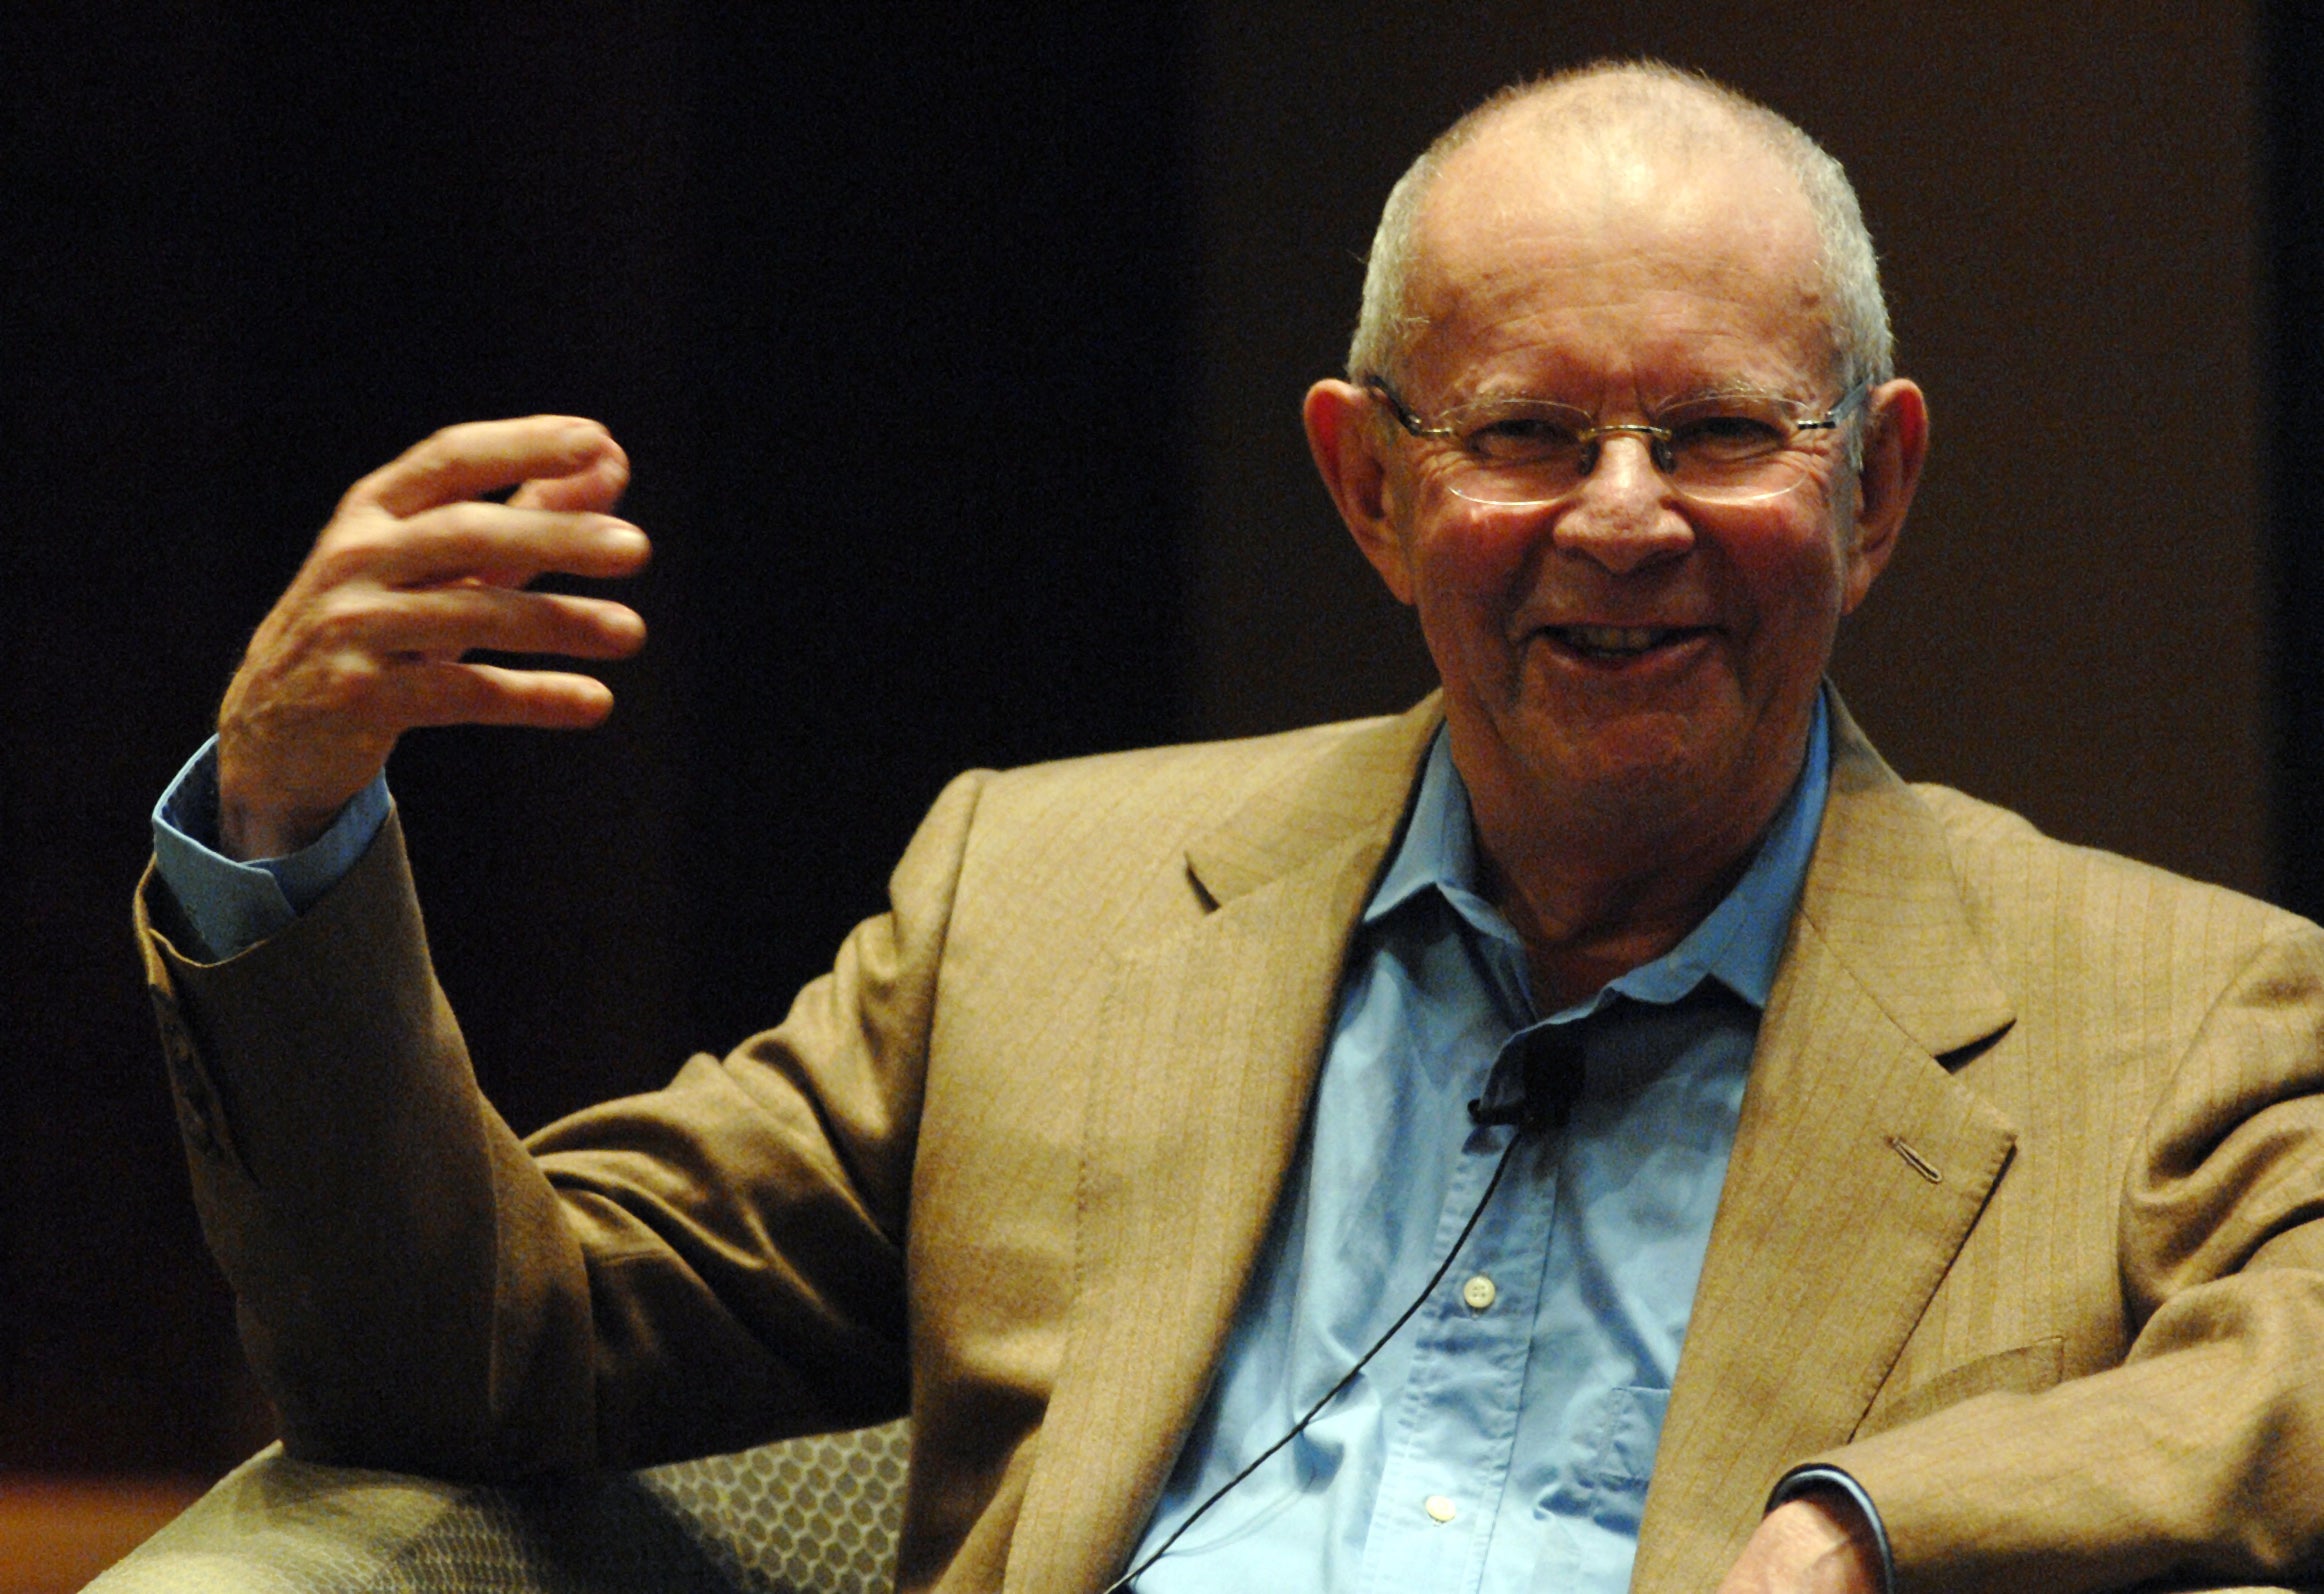 Internationally acclaimed author Wilbur Smith has died in South Africa aged 88